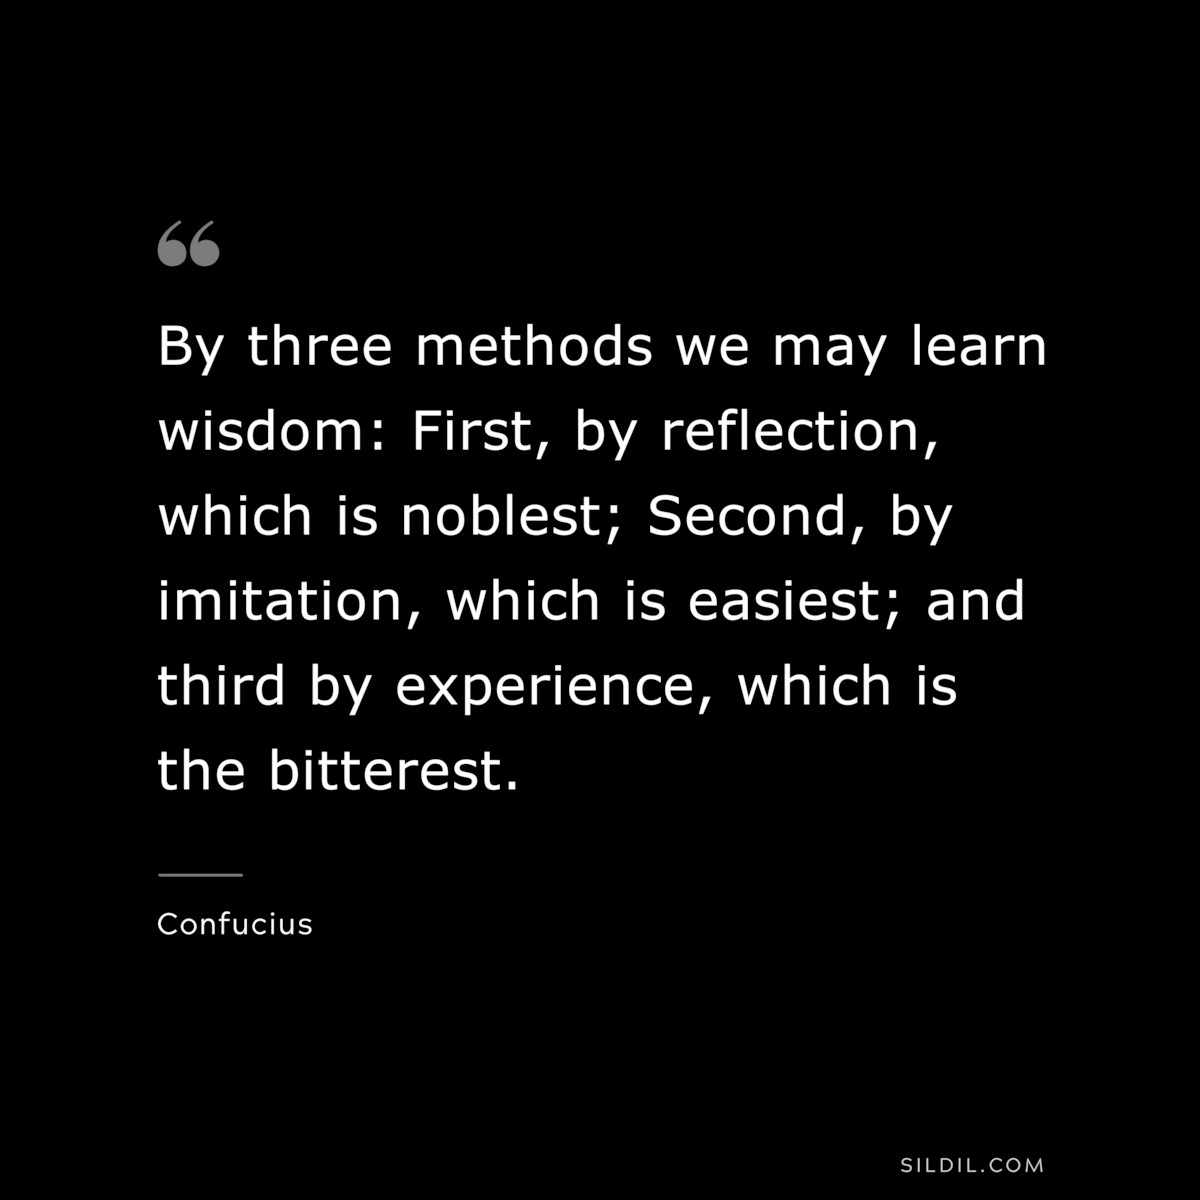 By three methods we may learn wisdom: First, by reflection, which is noblest; Second, by imitation, which is easiest; and third by experience, which is the bitterest. ― Confucius